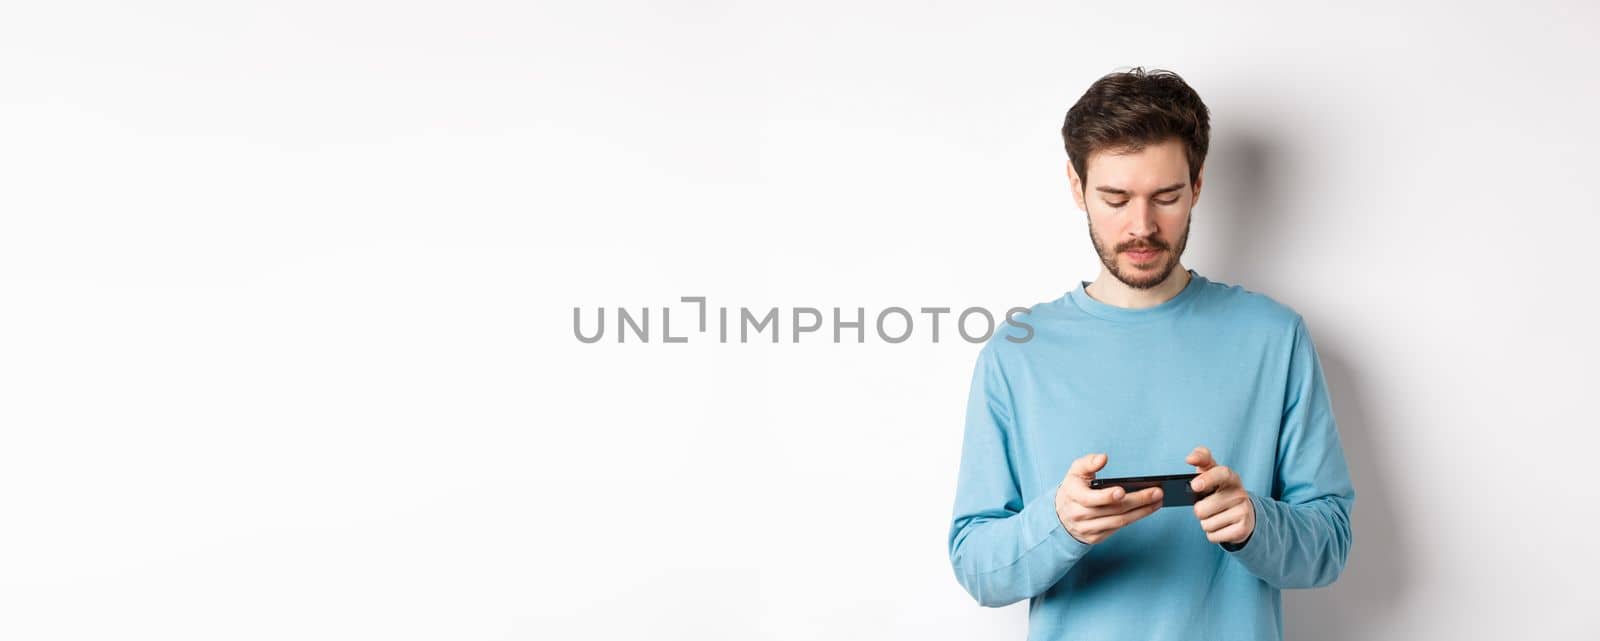 Male model playing video game on smartphone, looking serious at mobile screen, standing in sweatshirt over white background.